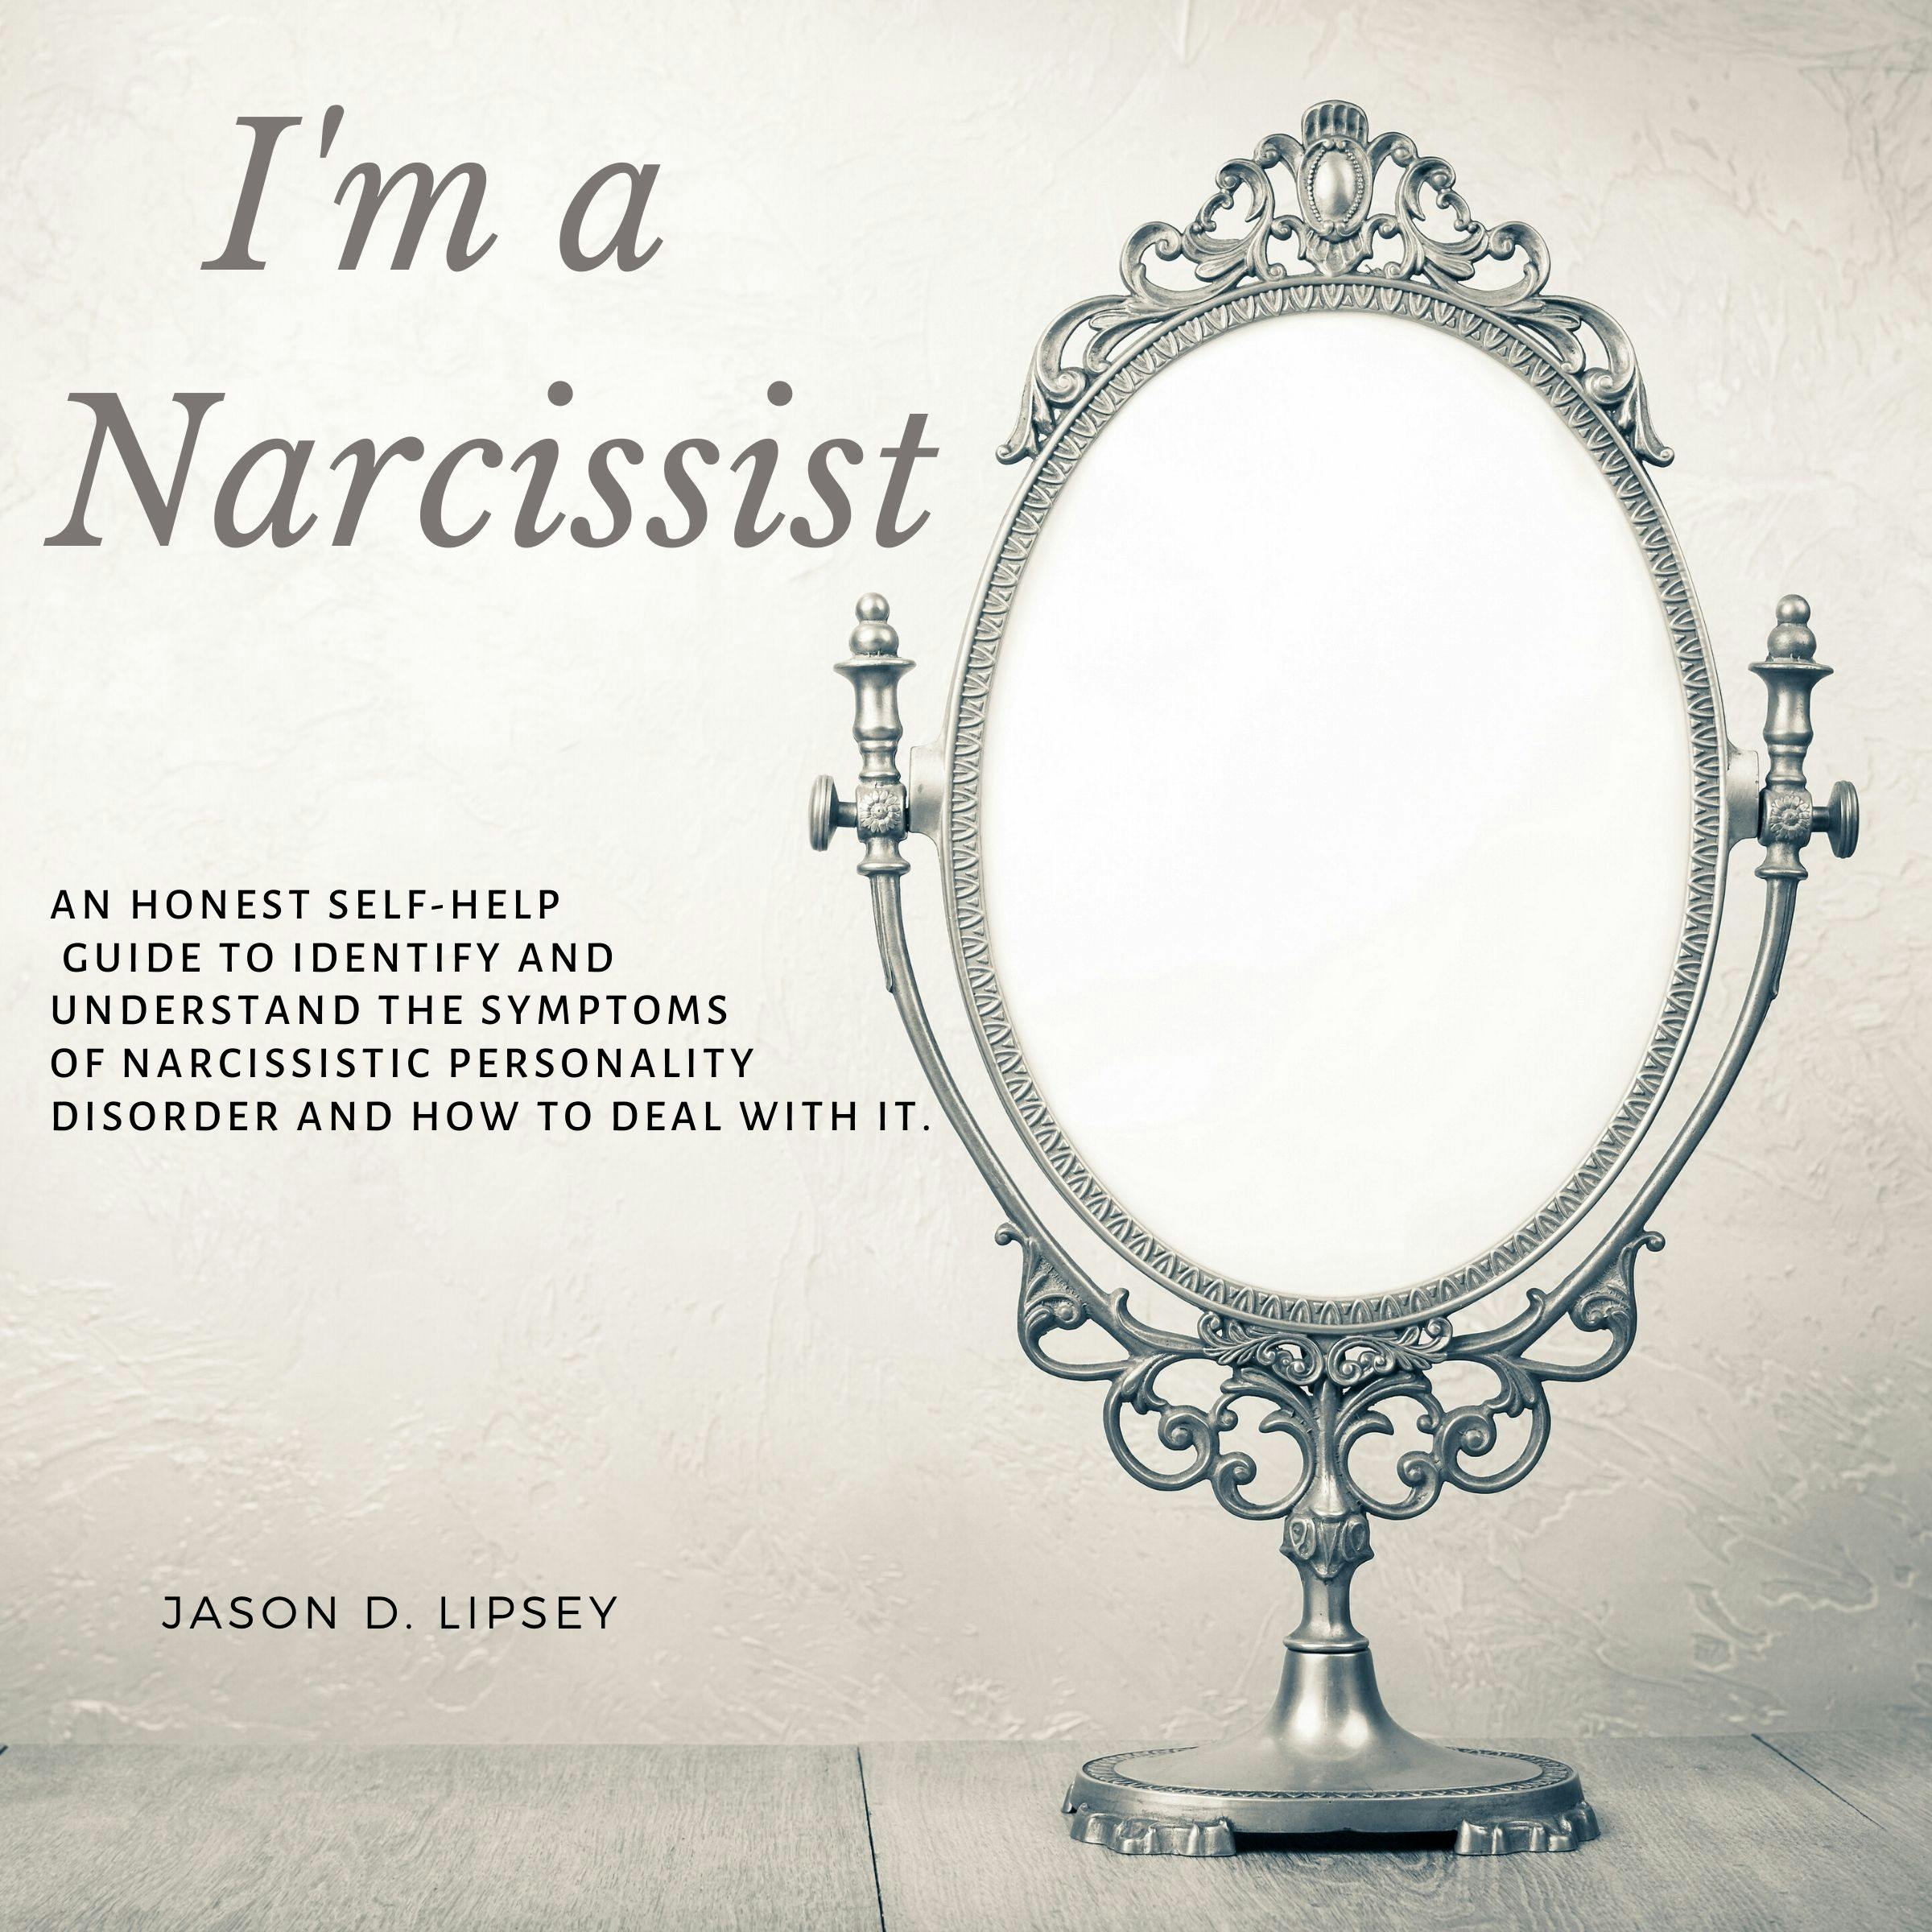 I'm a narcissist: An Honest Self-Help Guide To Identify And Understand The Symptoms Of Narcissistic Personality Disorder And How Do Deal With It - Jason D. lipsey